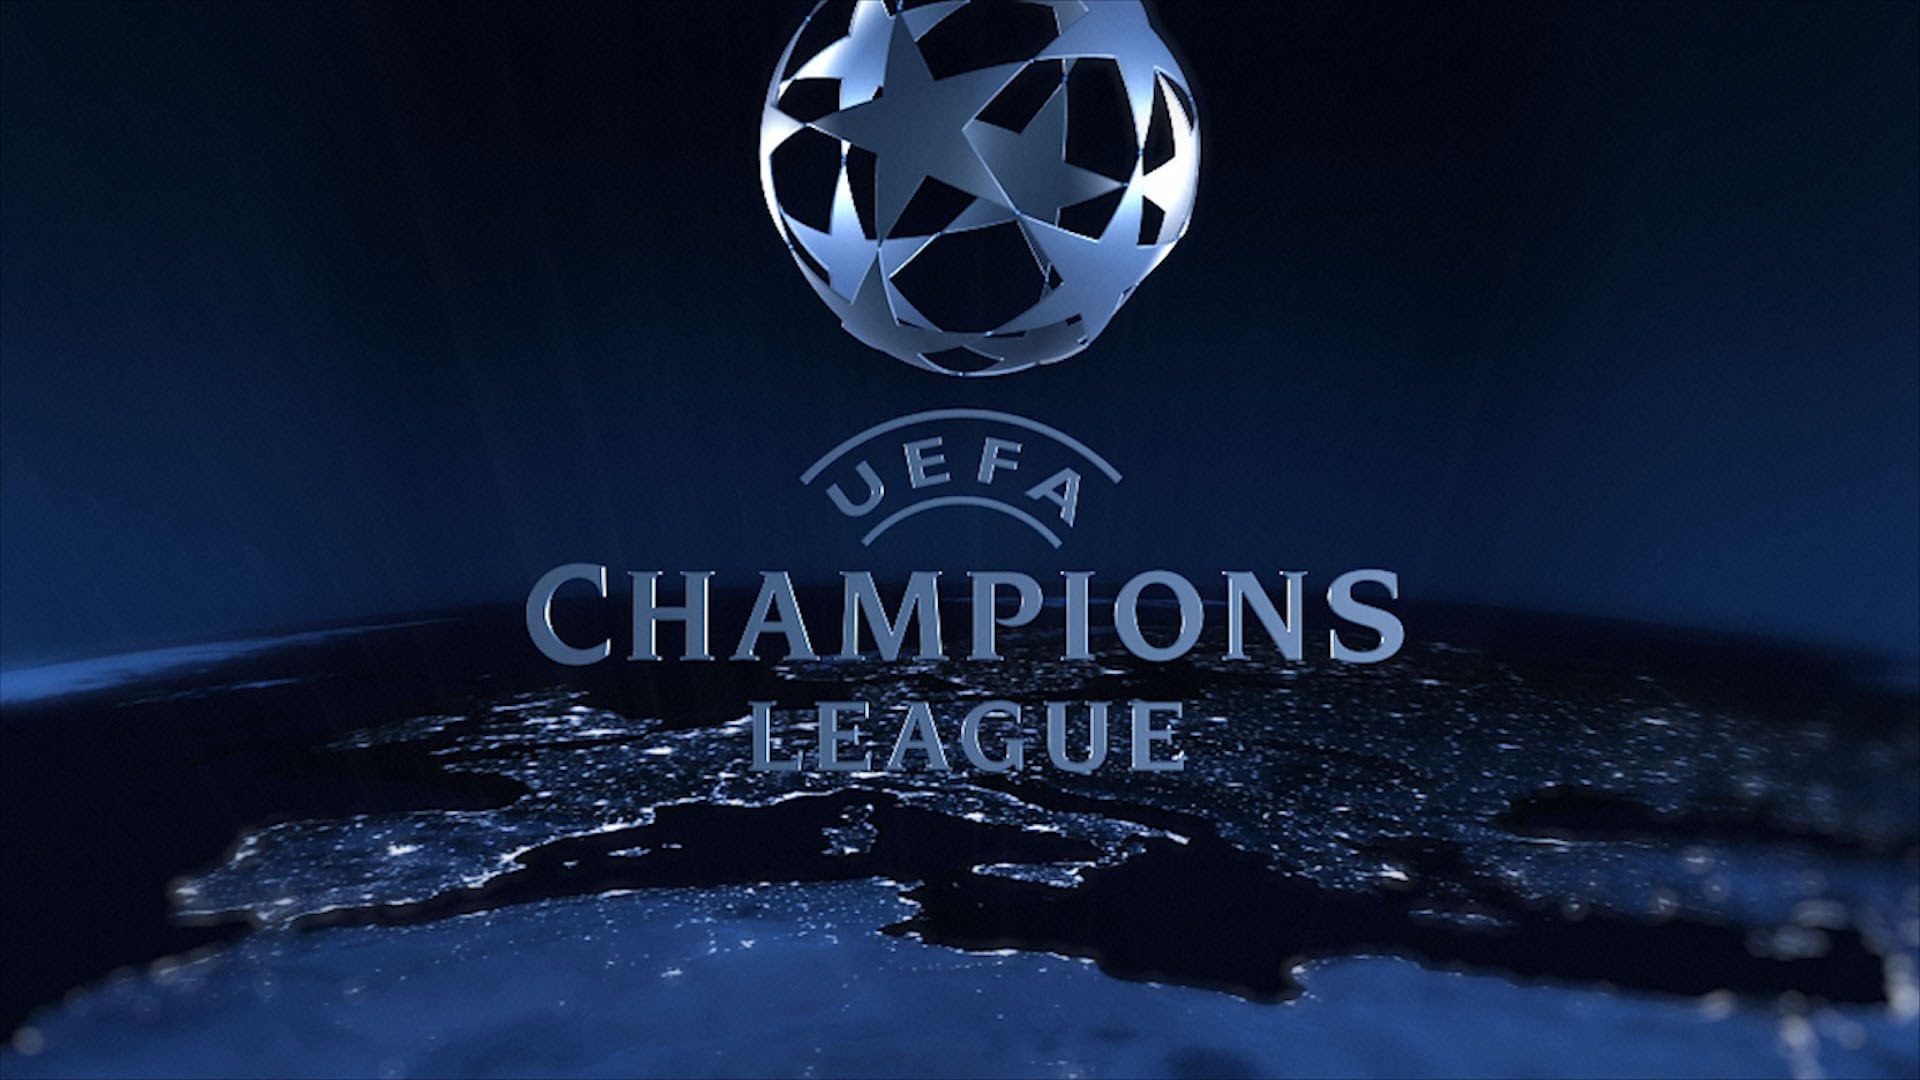 champions league wallpapers 70 pictures champions league wallpapers 70 pictures